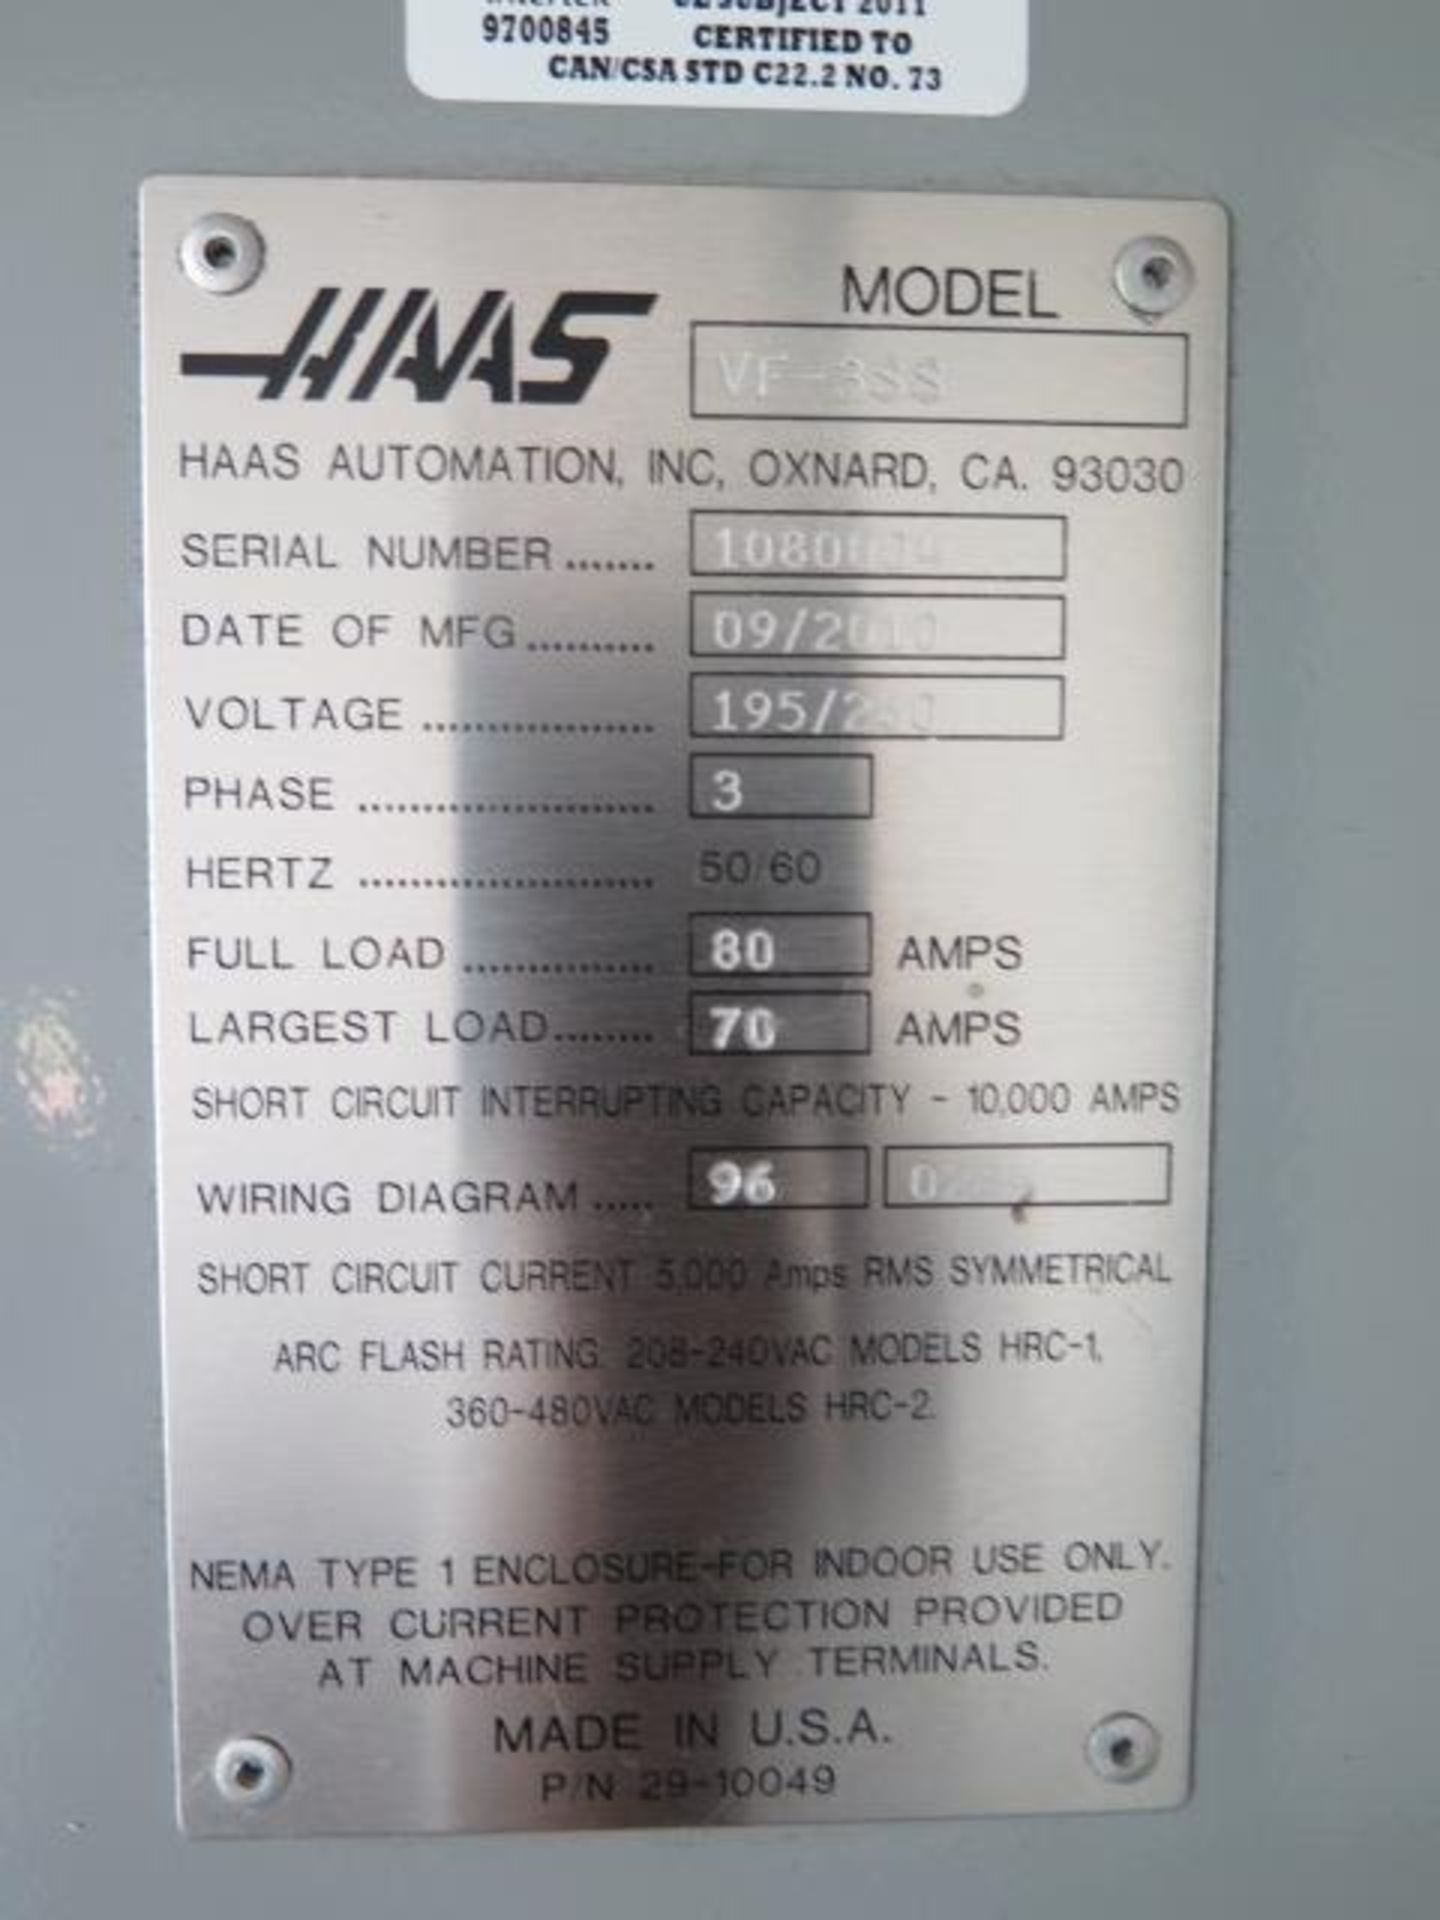 2010 Haas VF-3SS 4-Axis CNC VMC s/n 1080004 w/ Haas Controls, 24 ATC, SOLD AS IS, LIVERMORE, CA - Image 19 of 19